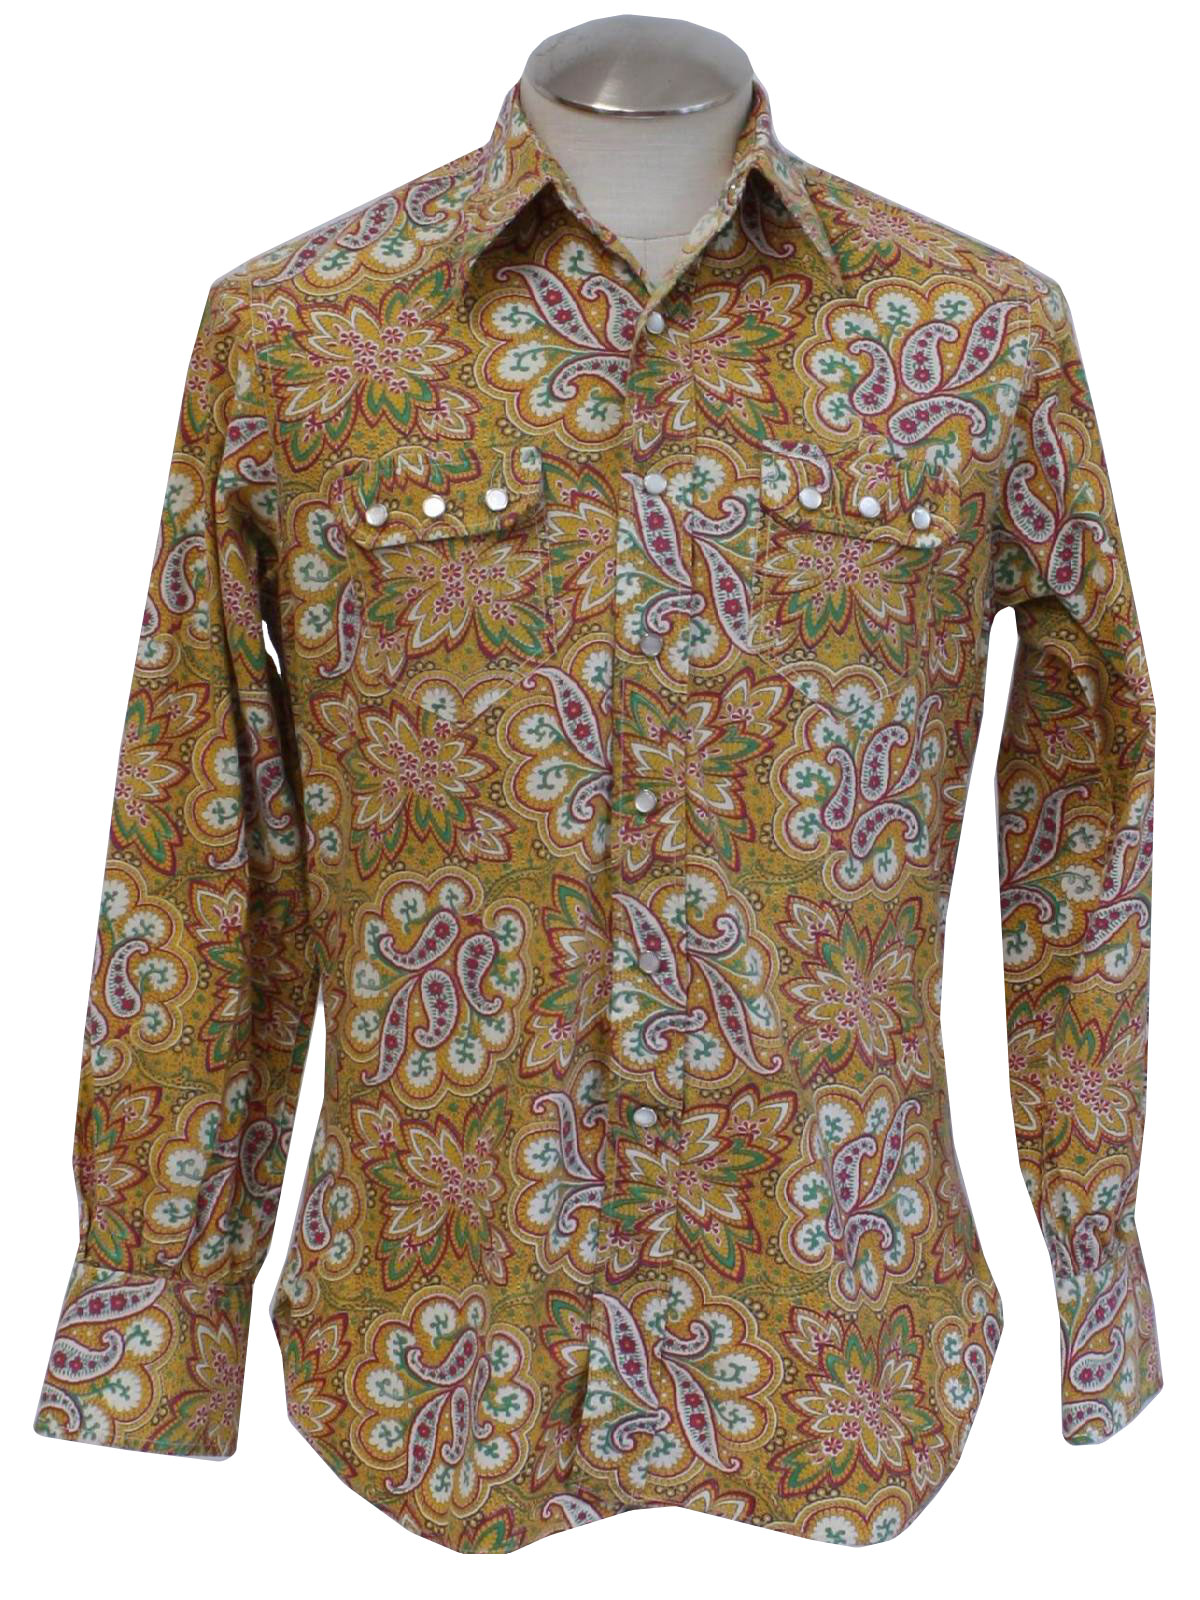 Vintage 1960s Western Shirt: Late 60s -No Label- Mens gold background ...